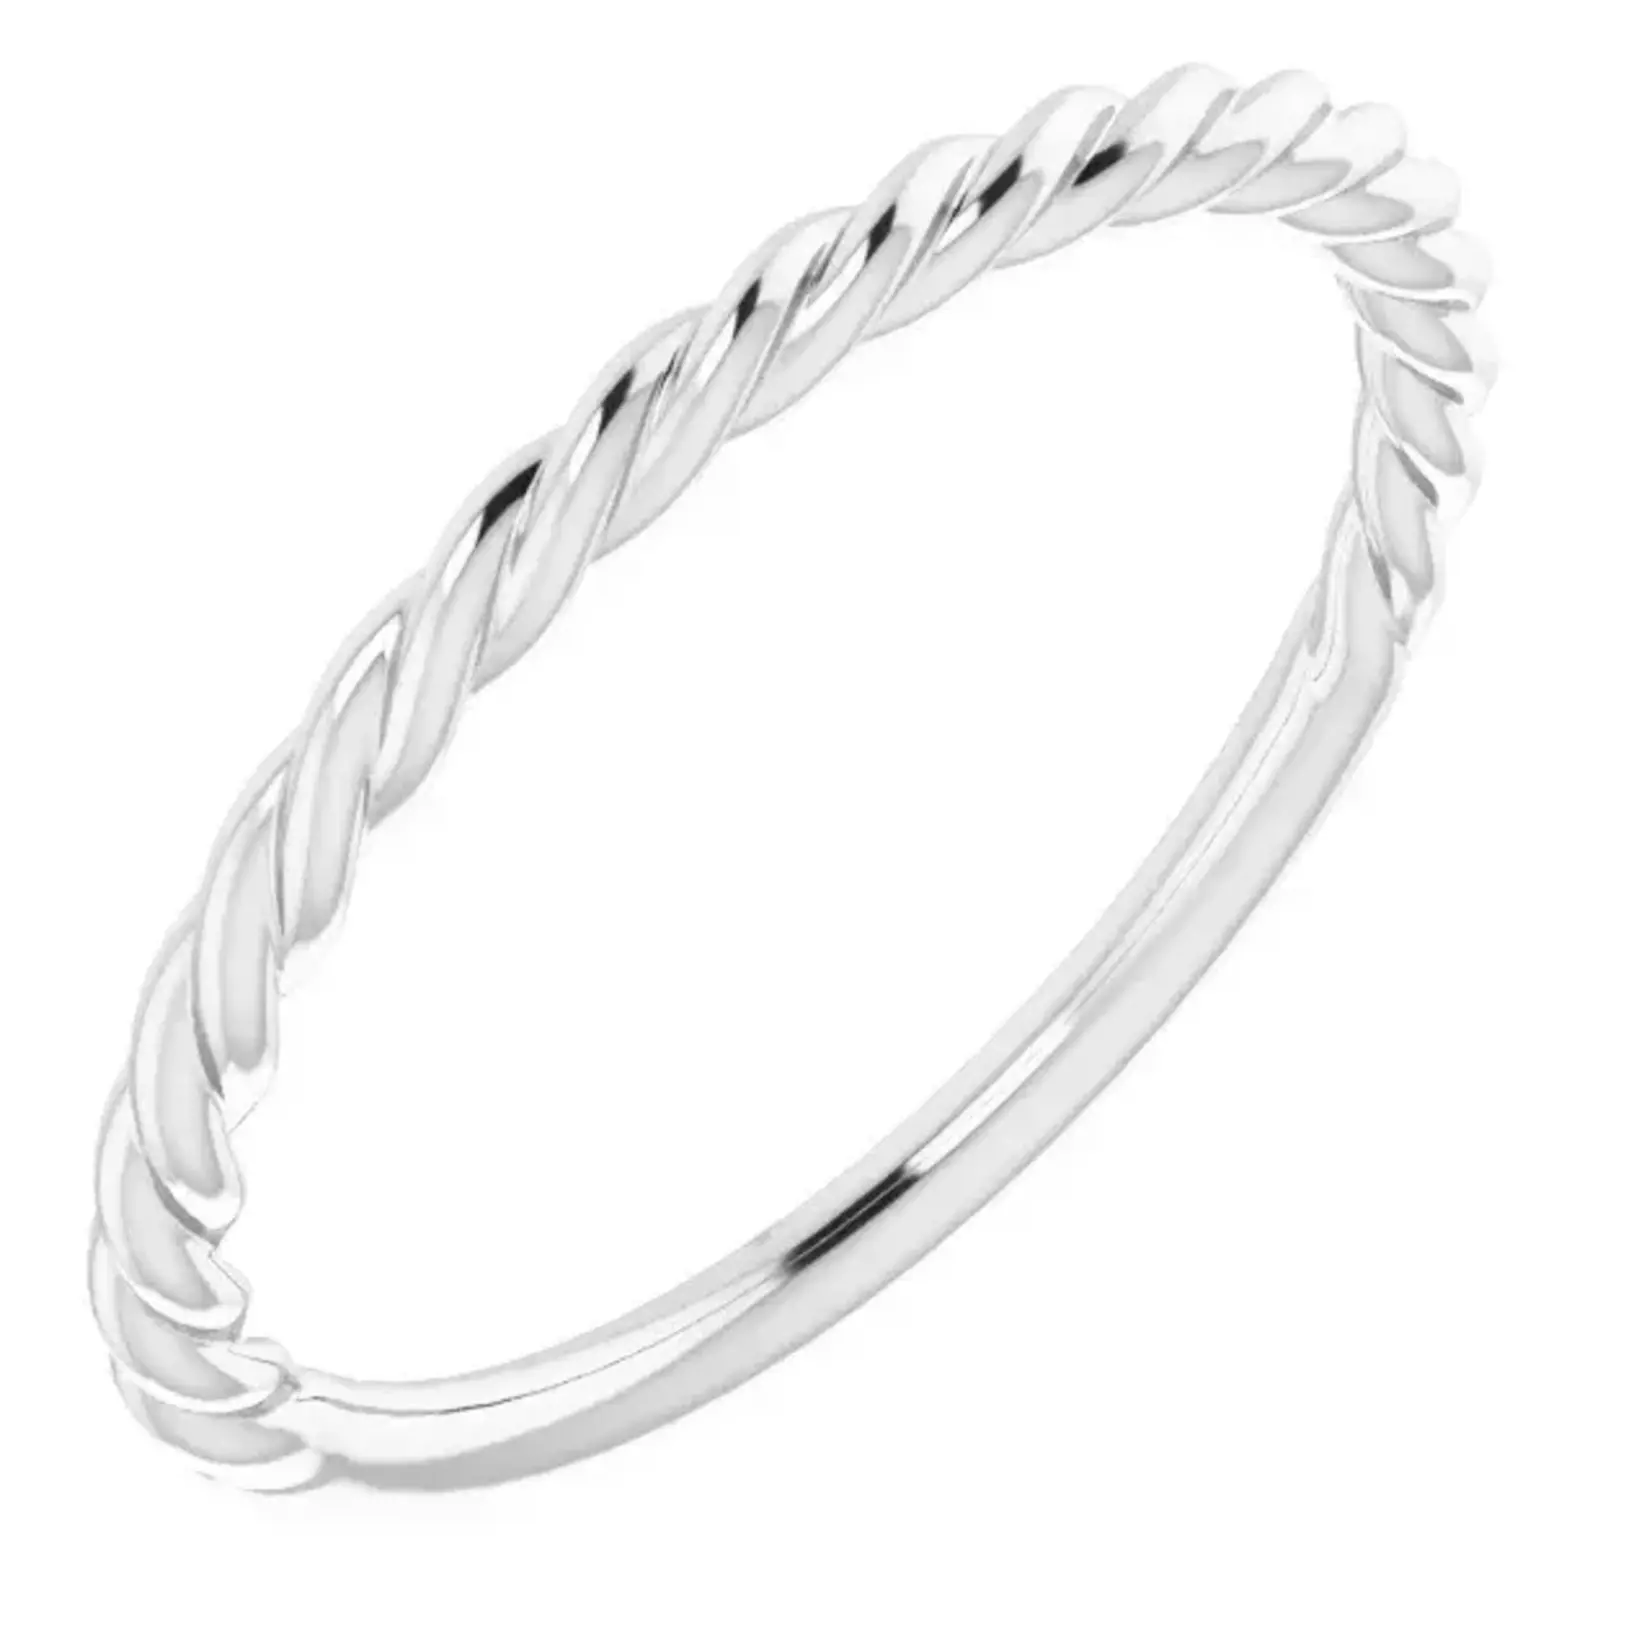 Franklin Jewelers Sterling Silver Twisted Rope Band 6.5sz 2mm